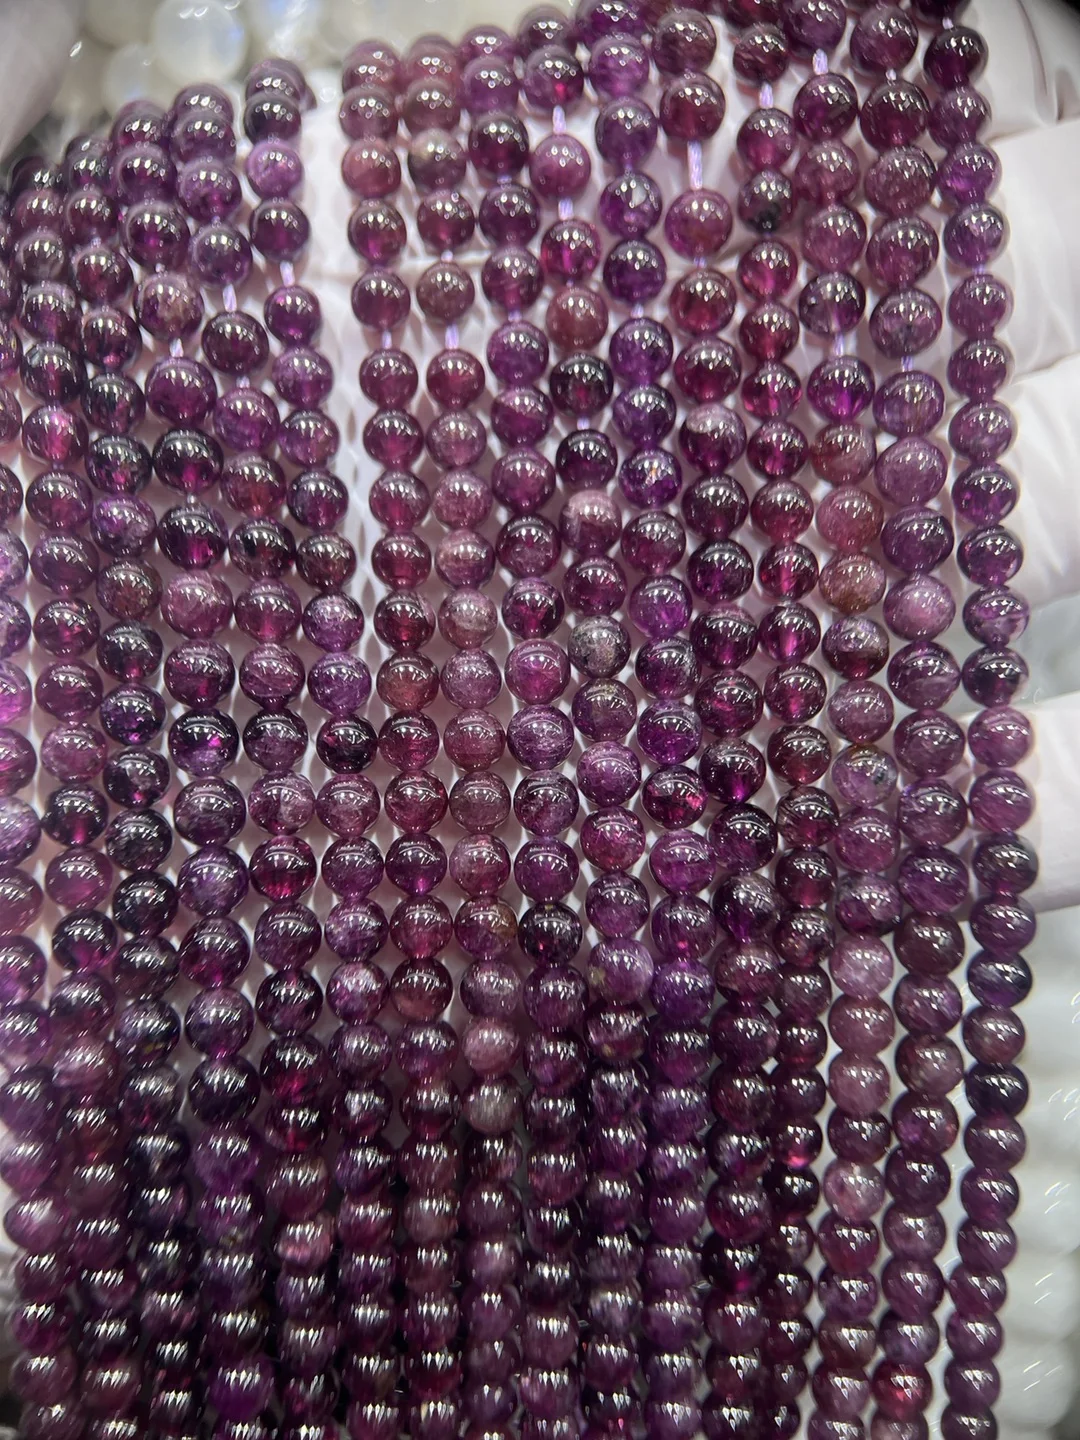 

Quality Garnet Stone Natural Gemstone Red Purple Polished Loose Round Seed Beads For Jewelry Accessories DIY Making